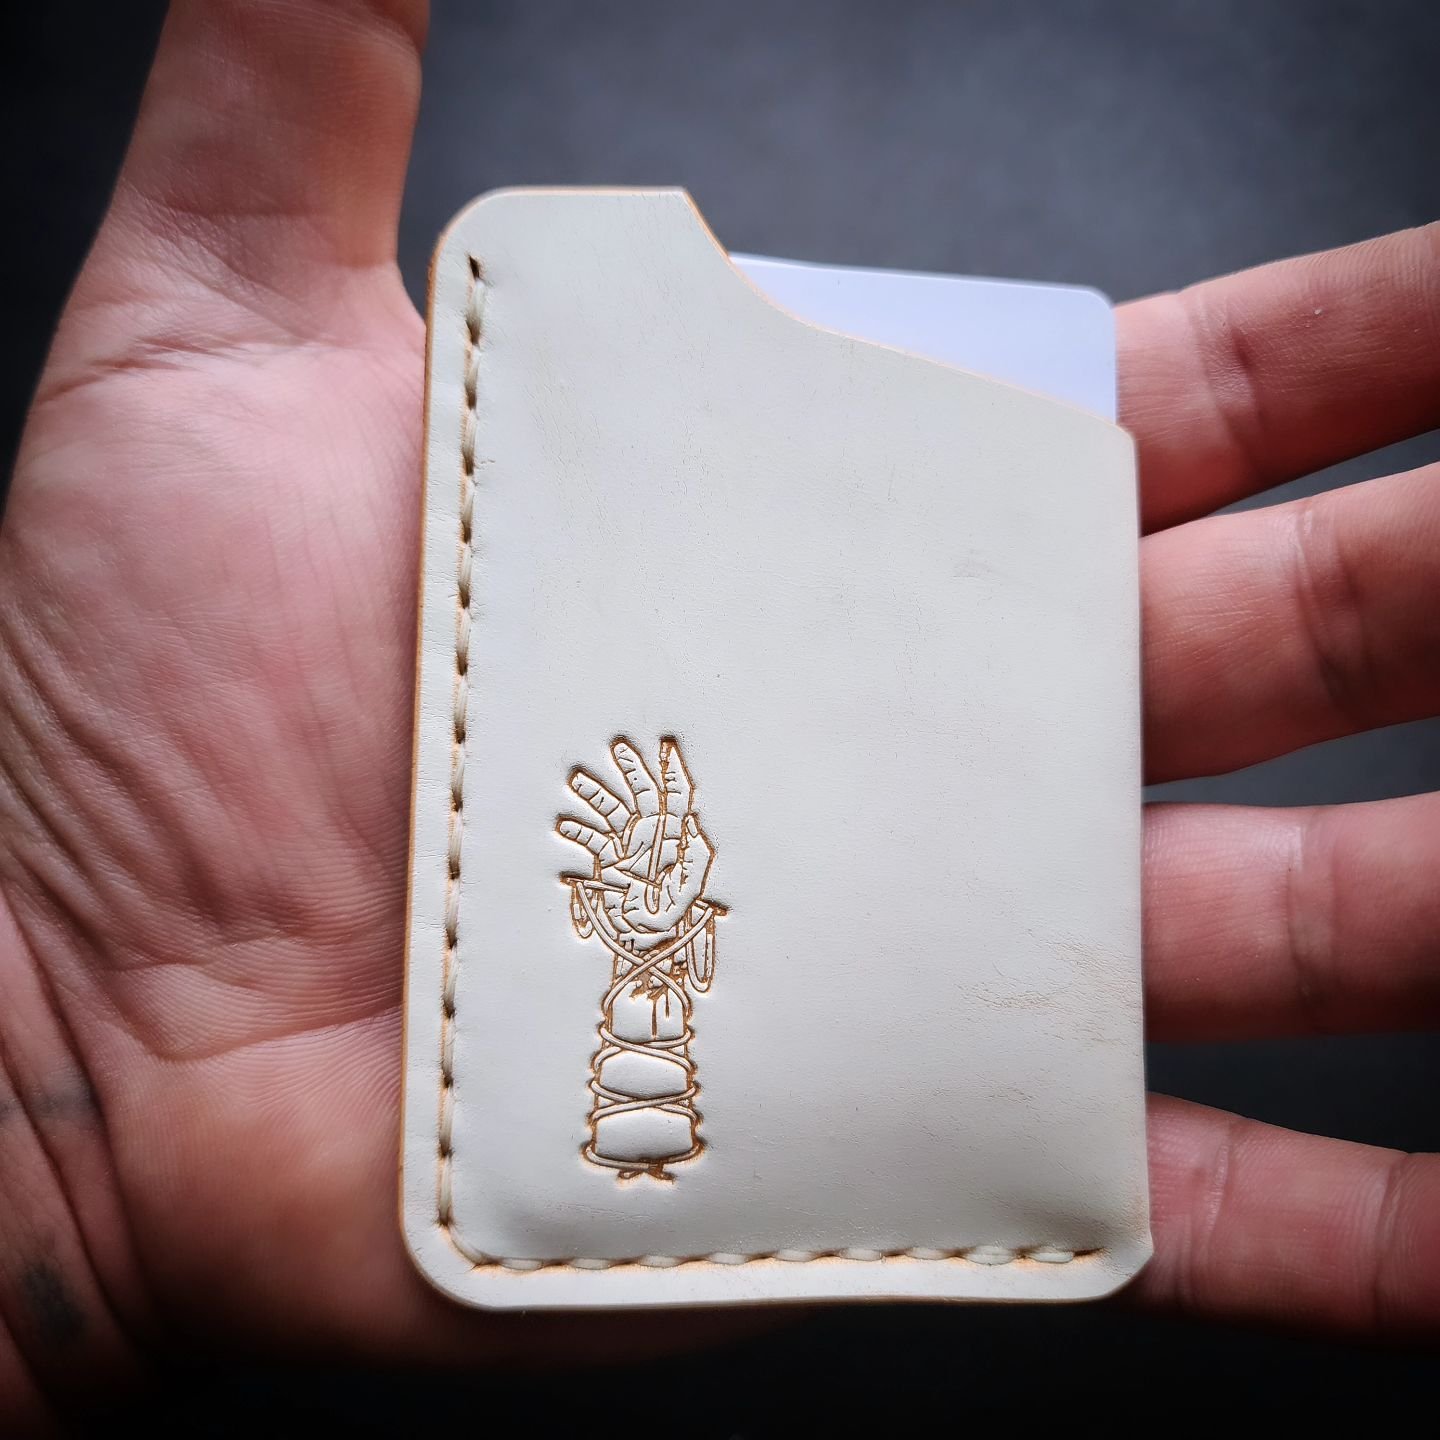 Special 107 Card Slip drops tonight at 7pm CST in Ghost Leather (White Wax over Natural VegTan). Wax wears off with use revealing the Natural VegTan Leather underneath which will start to patina and age beautifully. Handmade &amp; Handstitched in Tex